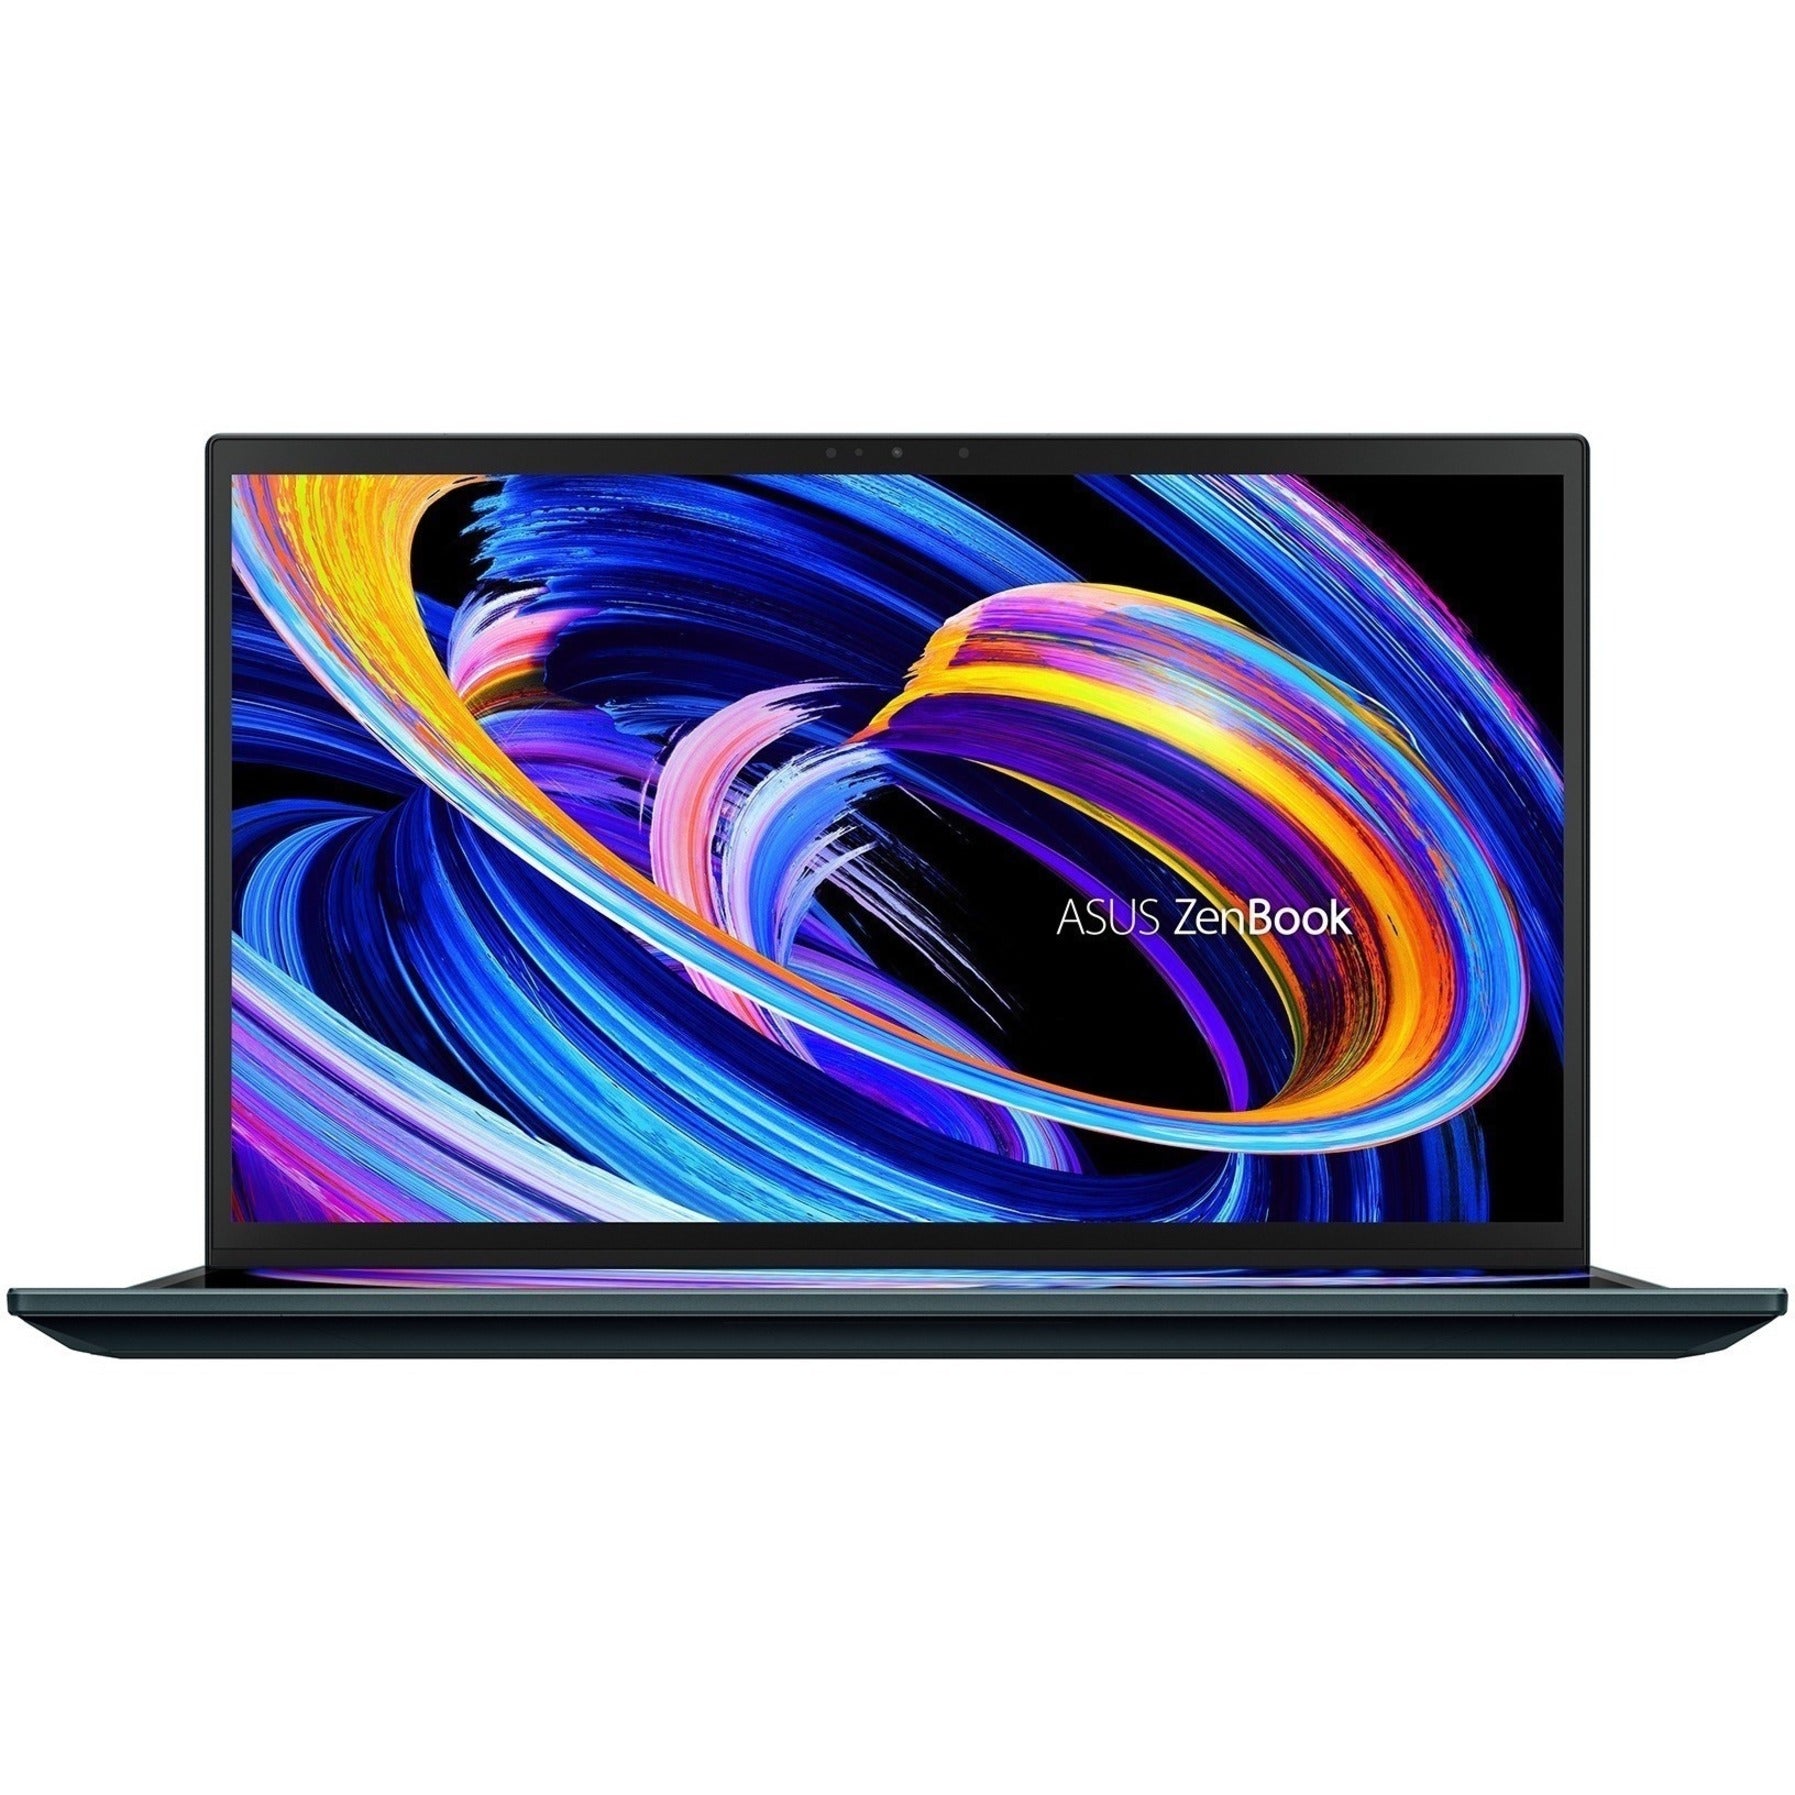 Asus UX582ZM-XS99T ZenBook Pro Duo 15 OLED 15.6" Touchscreen Notebook, Intel Core i9, 32GB RAM, 1TB SSD, Celestial Blue